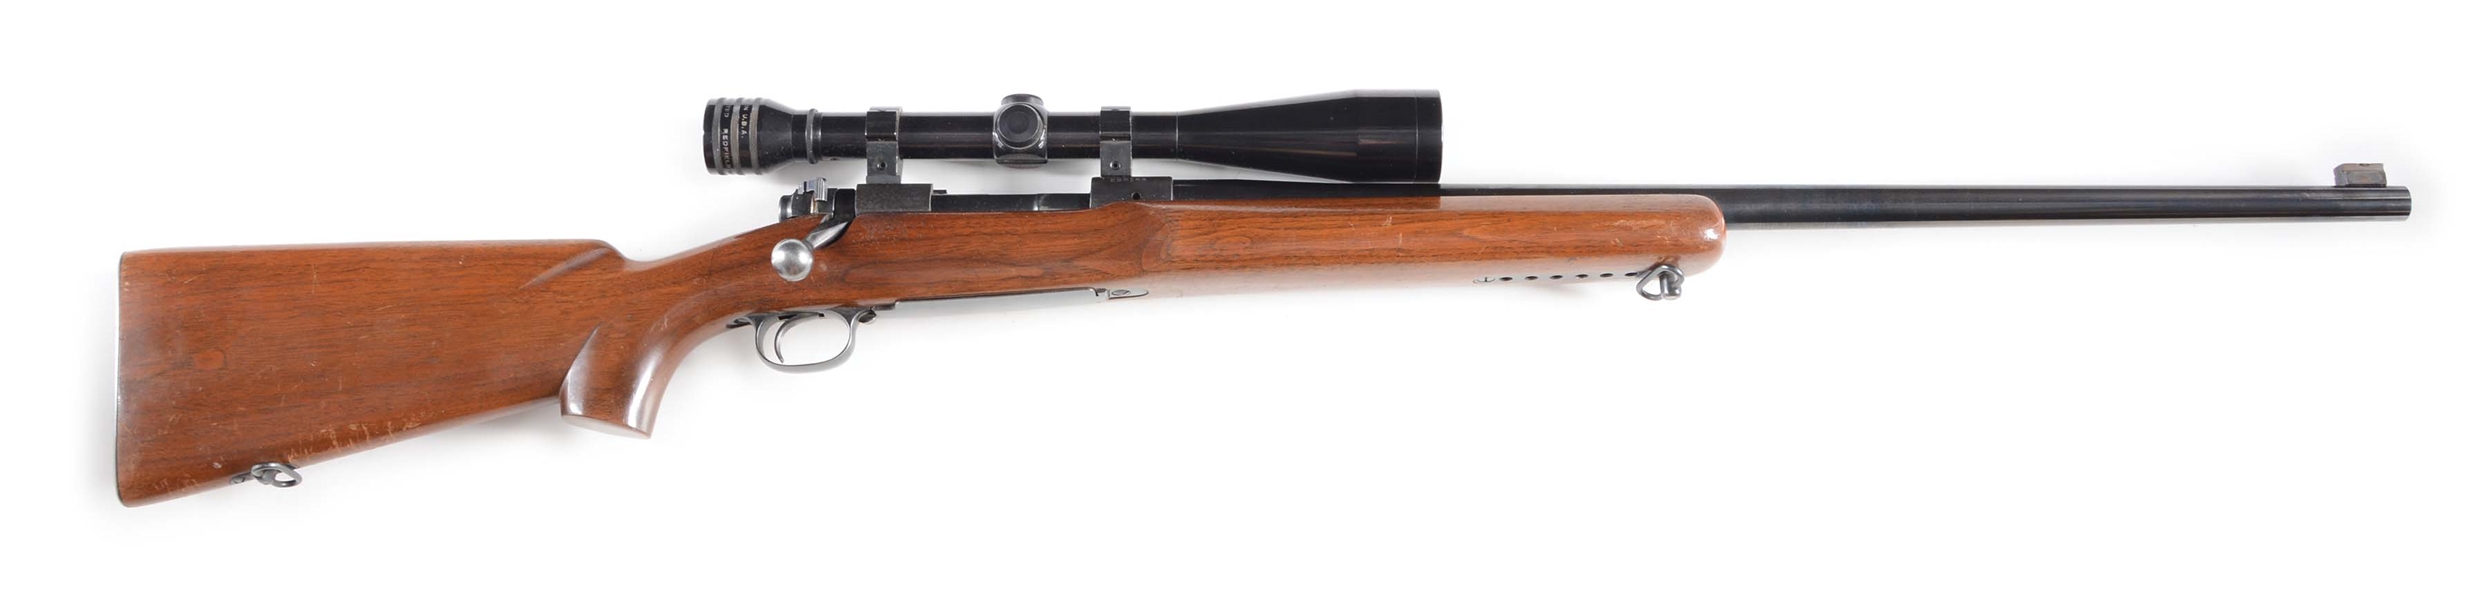 (C) WINCHESTER MODEL 70 BOLT ACTION TARGET RIFLE (1953).